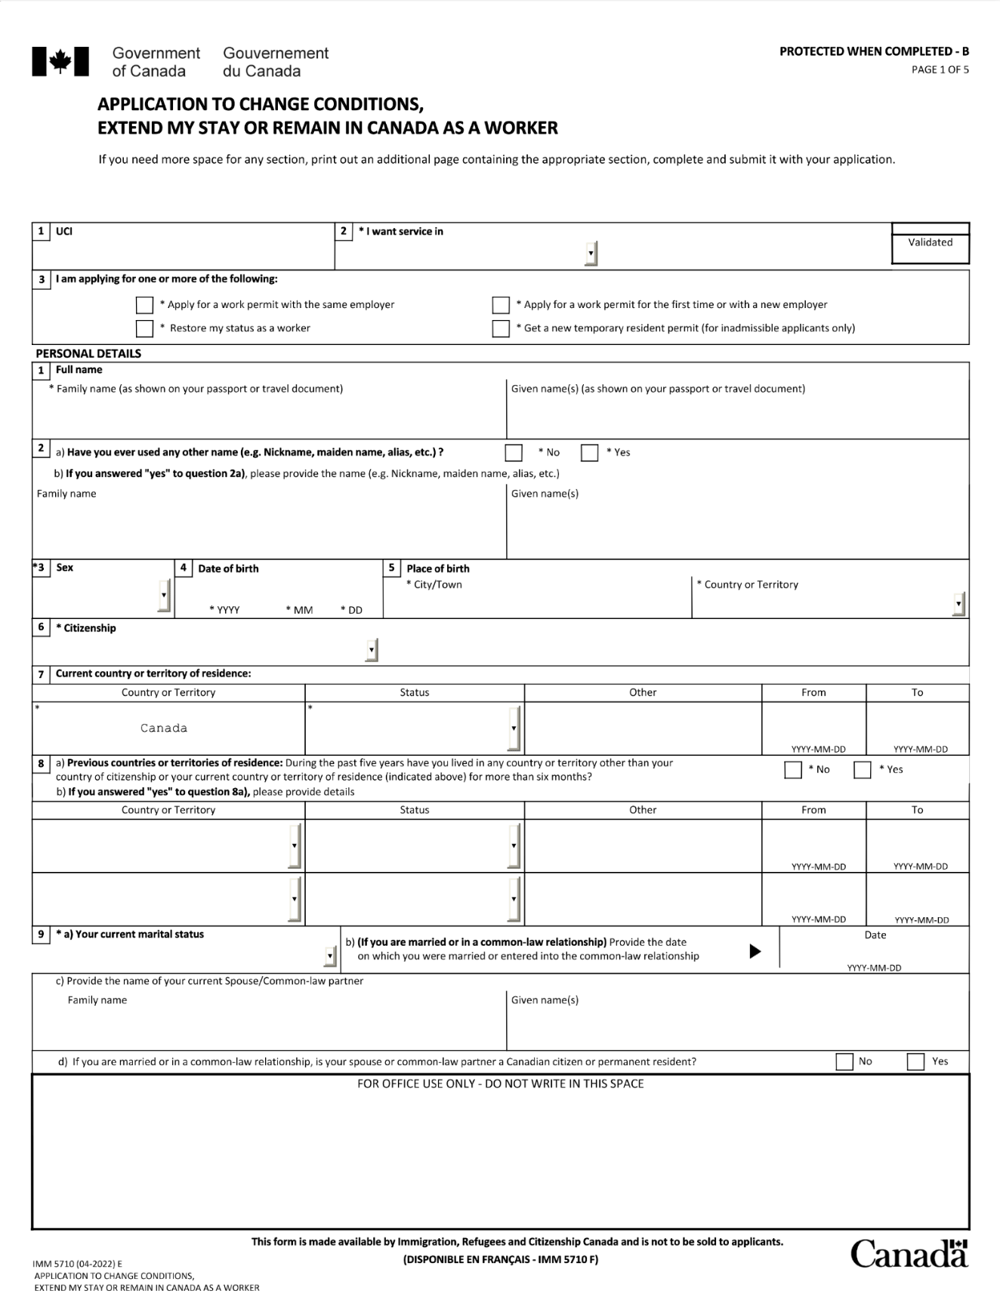 PGWP Official Form Completed